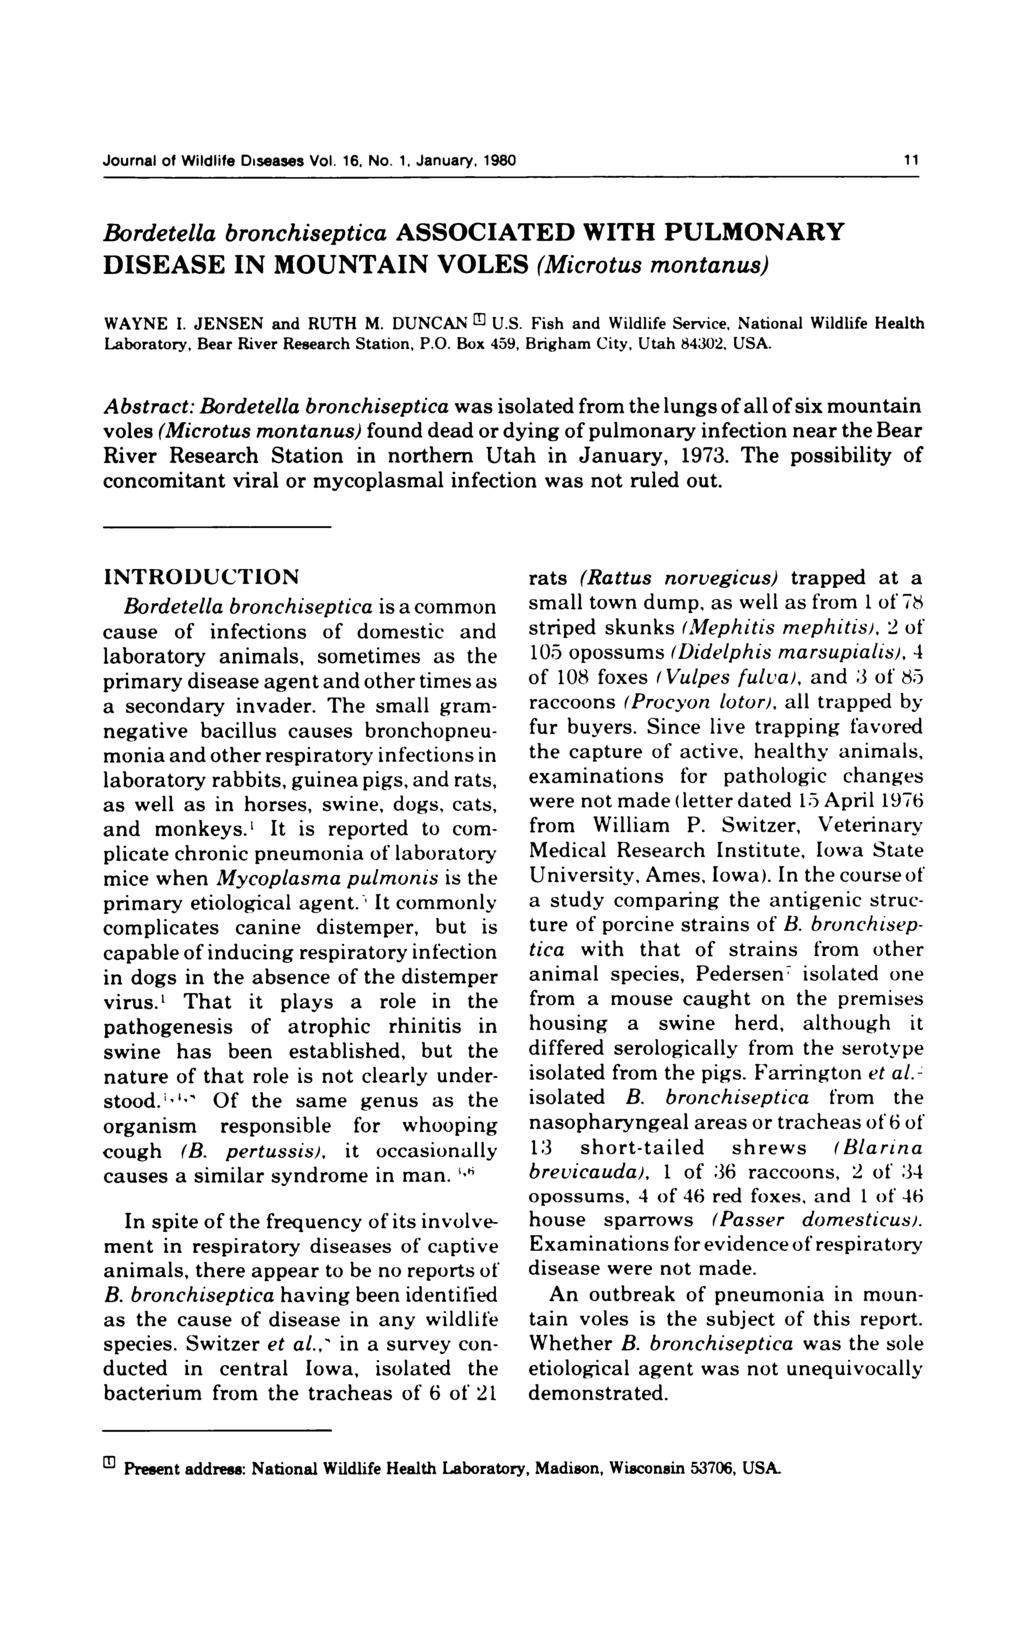 Journal of Wildlife Diseases Vol. 16, No. 1, January, 1980 11 Bordetella bronchiseptica ASSOCIATED WITH PULMONARY DISEASE IN MOUNTAIN VOLES (Microtus montanus) WAYNE I. JENSEN and RUTH M. DUNCAN U.S. Fish and Wildlife Service, National Wildlife Health Laboratory, Bear River Research Station, P.